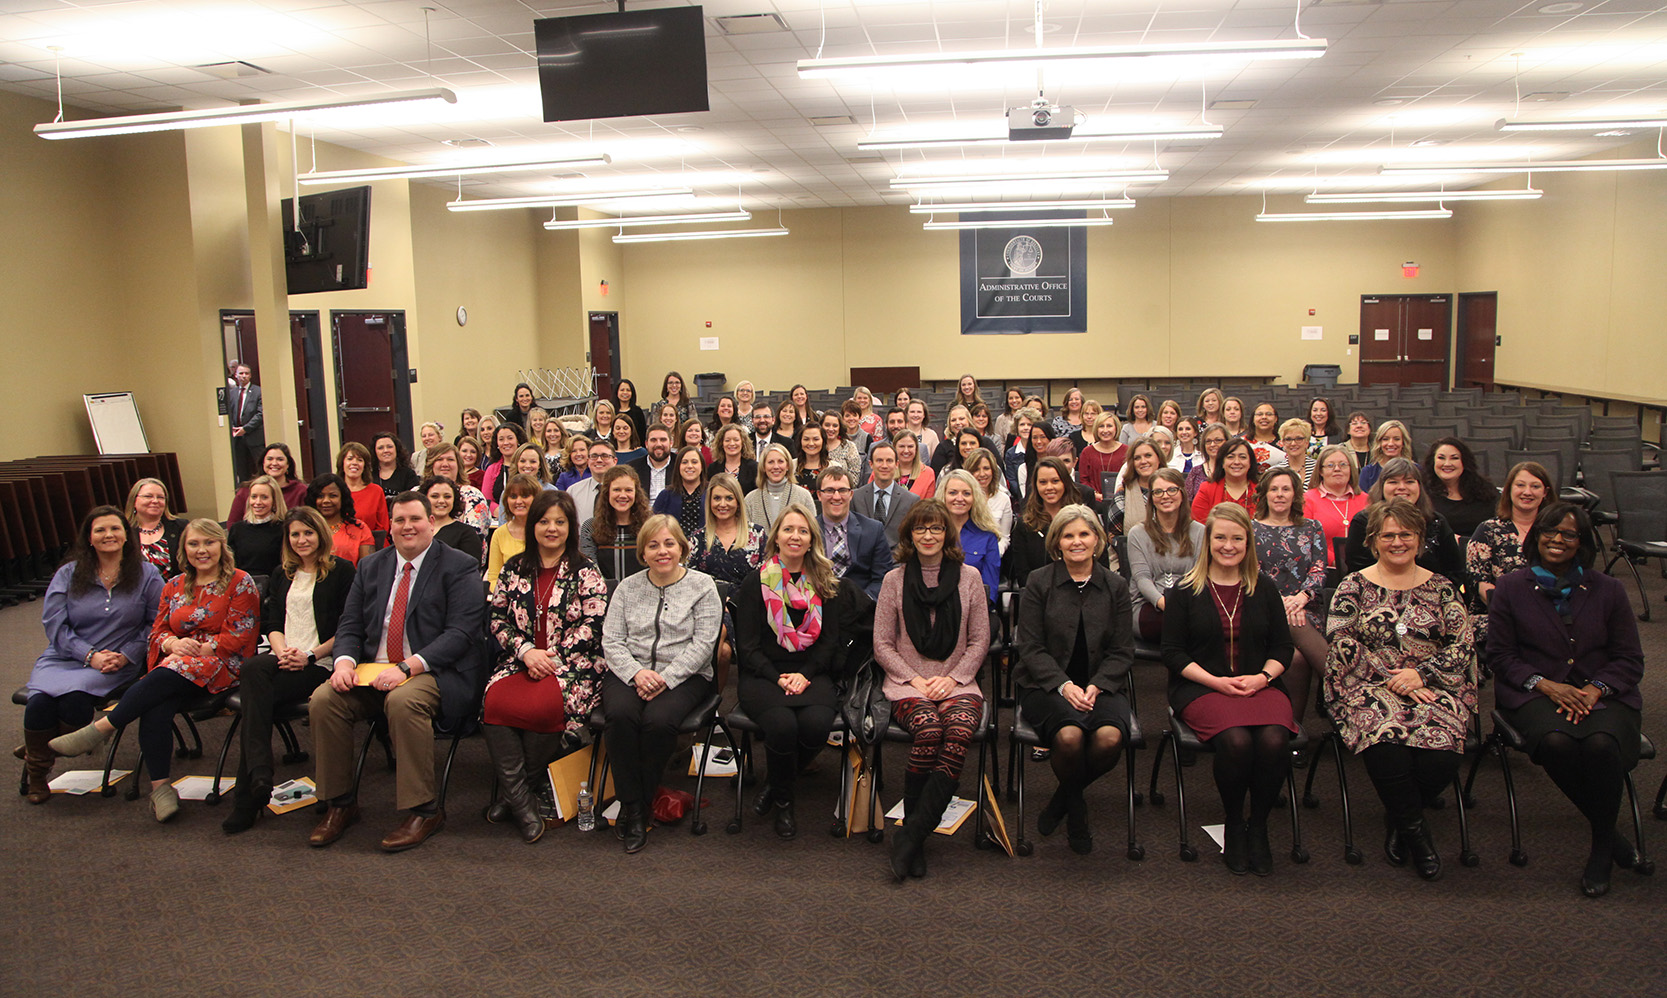 Kentucky recognized 191 teachers newly certified by the National Board for Professional Teaching Standards at a ceremony Feb. 19 in Frankfort. Kentucky ranked fourth in the nation of the most newly certified National Board teachers in 2018. Photo by Megan Gross, Feb. 19, 2019